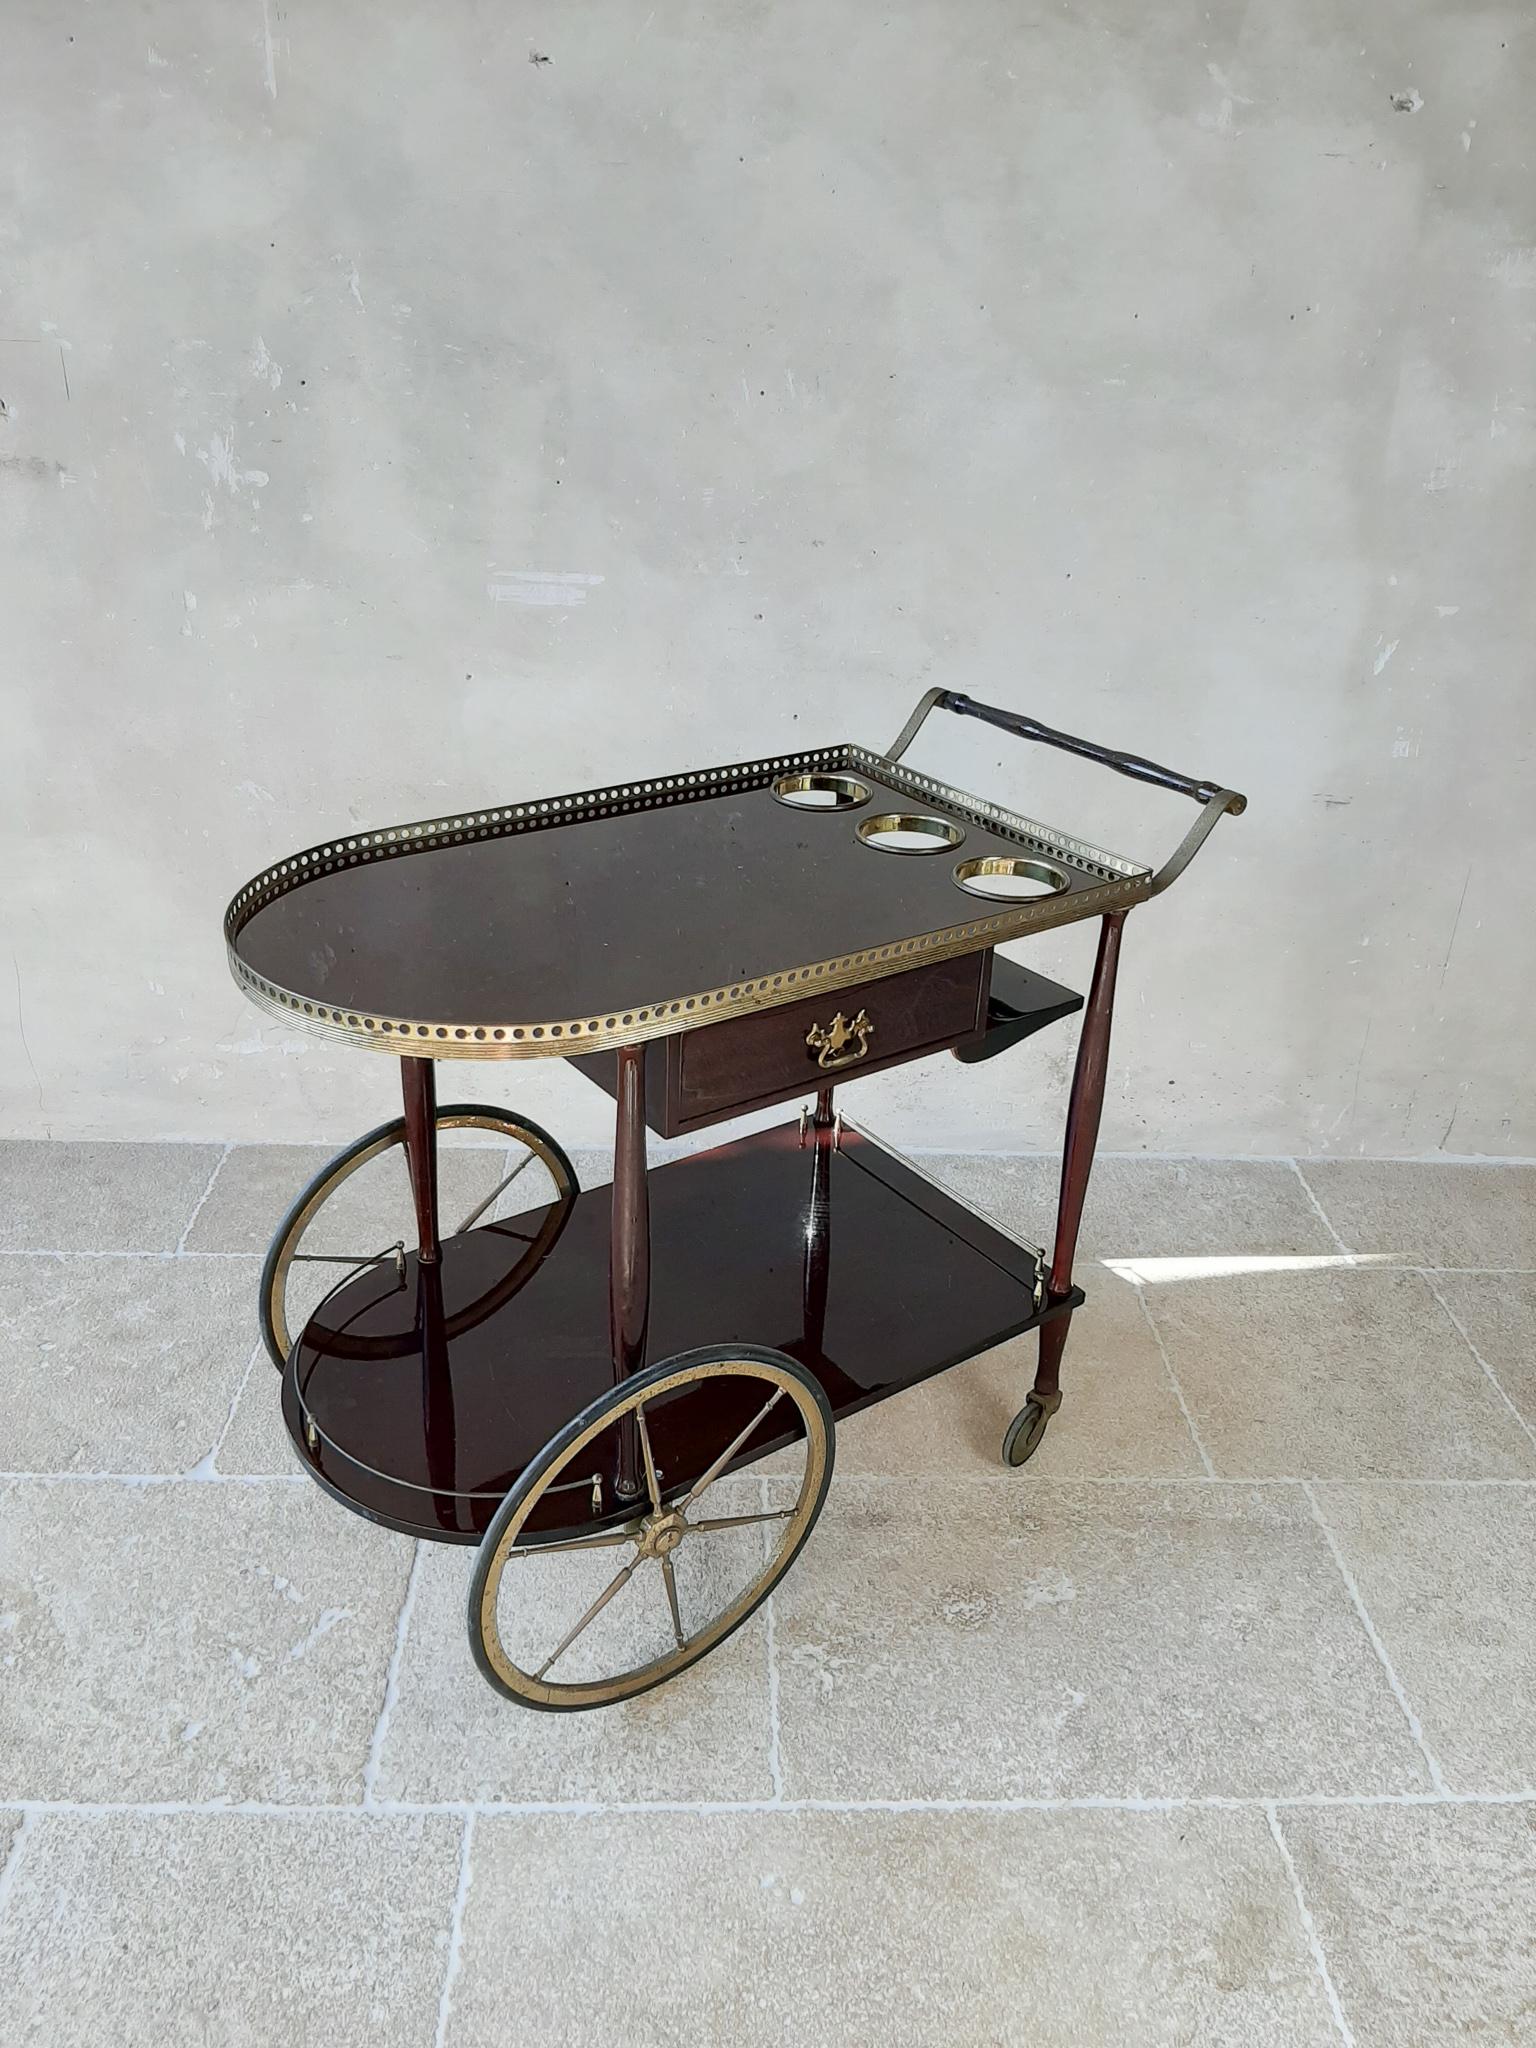 Mid-Century Modern Italian mahogany and brass serving trolley in the style of Cesare Lacca and Aldo Tura. This stylish bar cart has a mahogany frame and shelves finished with brass details around the rims, handles and the wheels. This piece has two